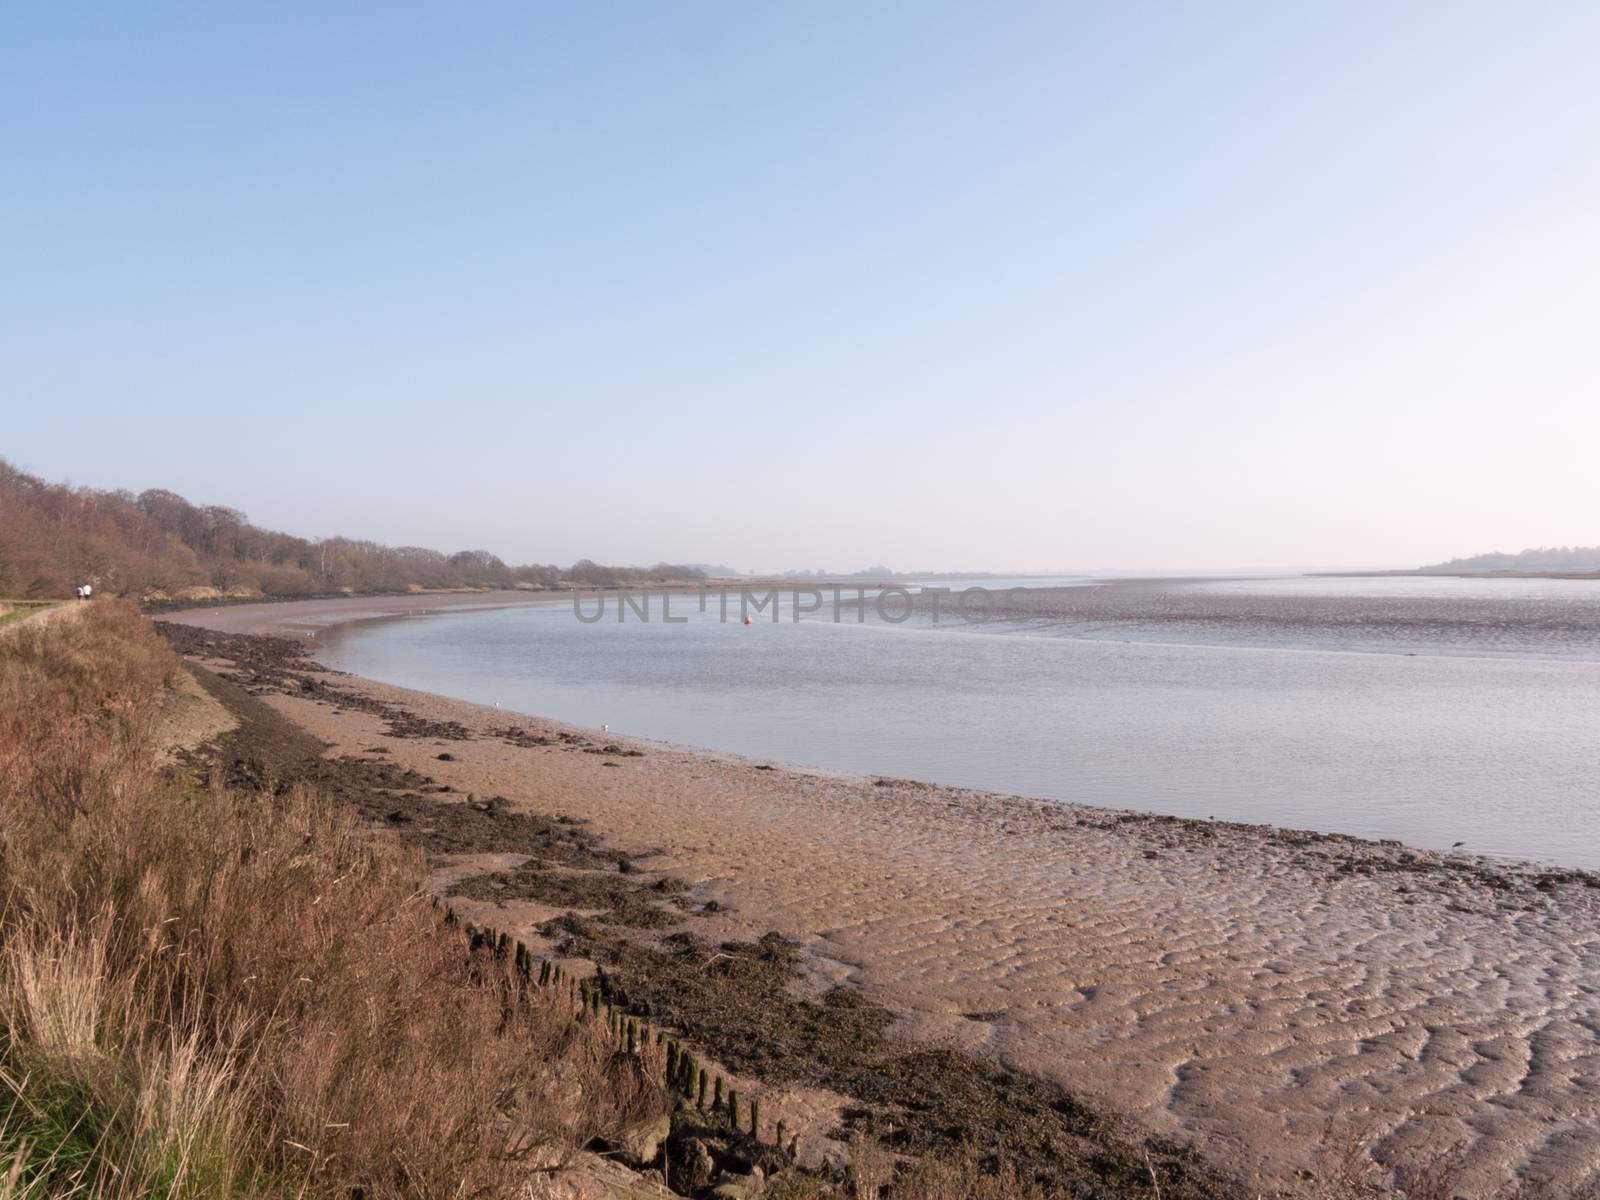 Incredibly Beautiful Shots of the River Beds in Wivenhoe Essex a by callumrc